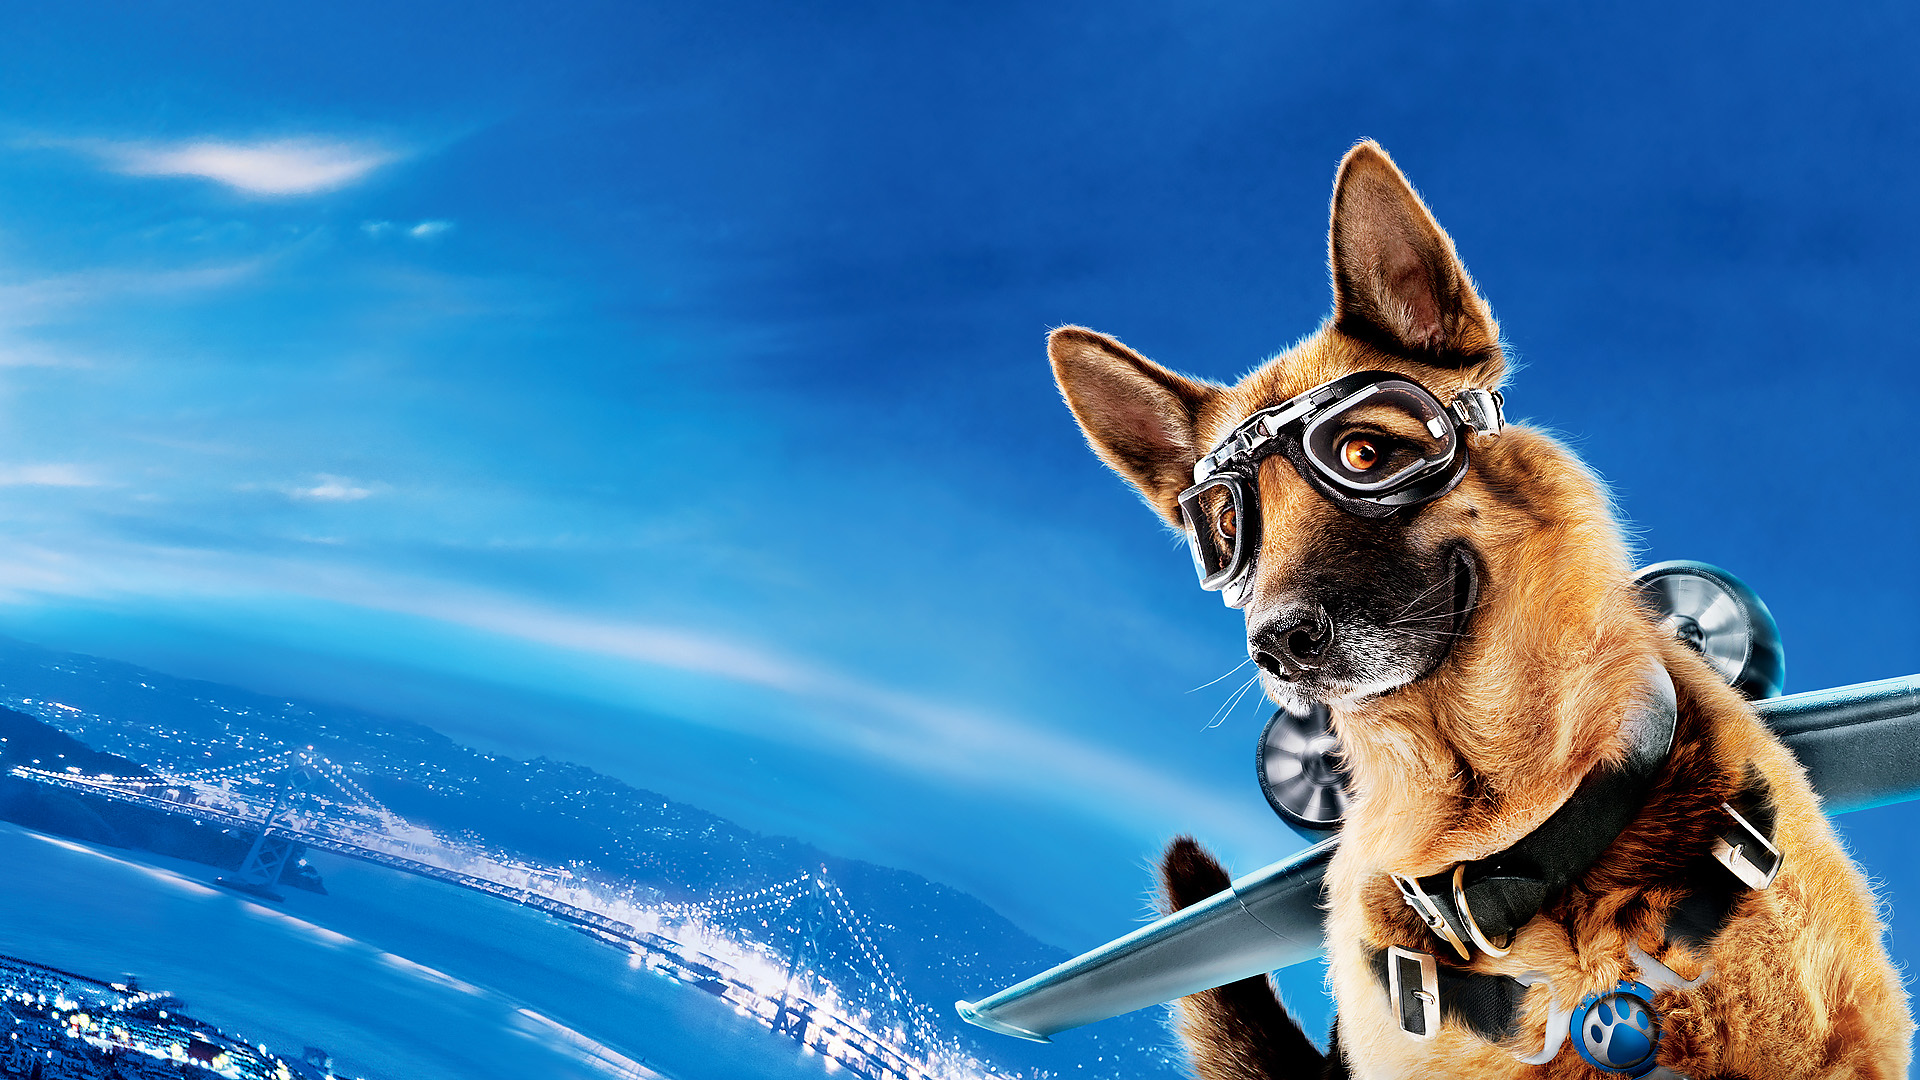 Movie Cats & Dogs: The Revenge Of Kitty Galore HD Wallpaper | Background Image